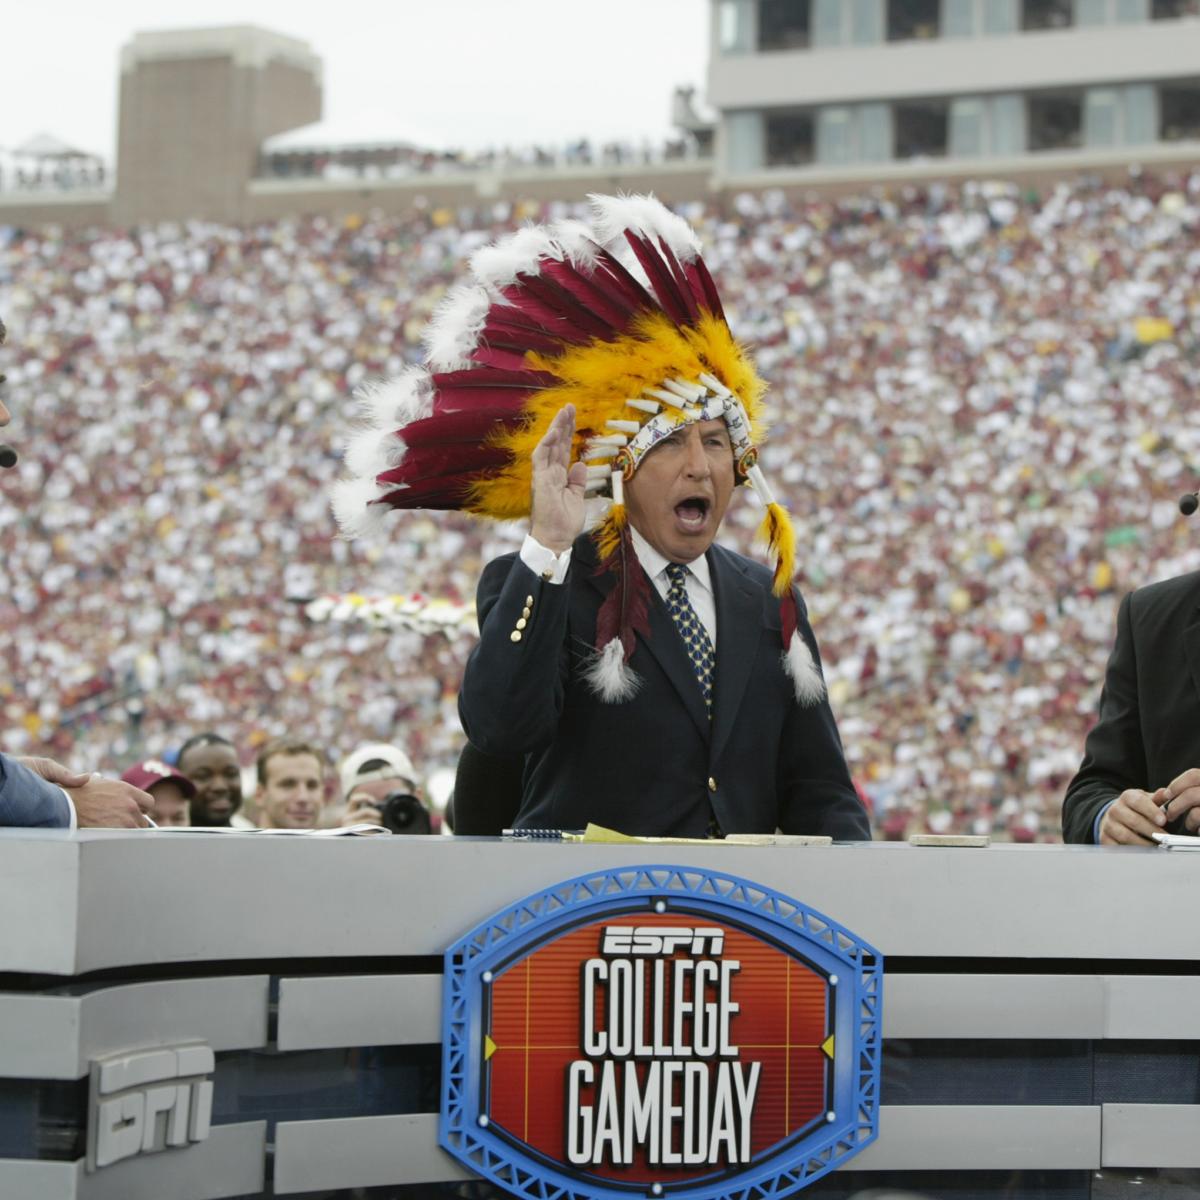 College GameDay 2012 Schedule: Previewing the Show's Top Destinations